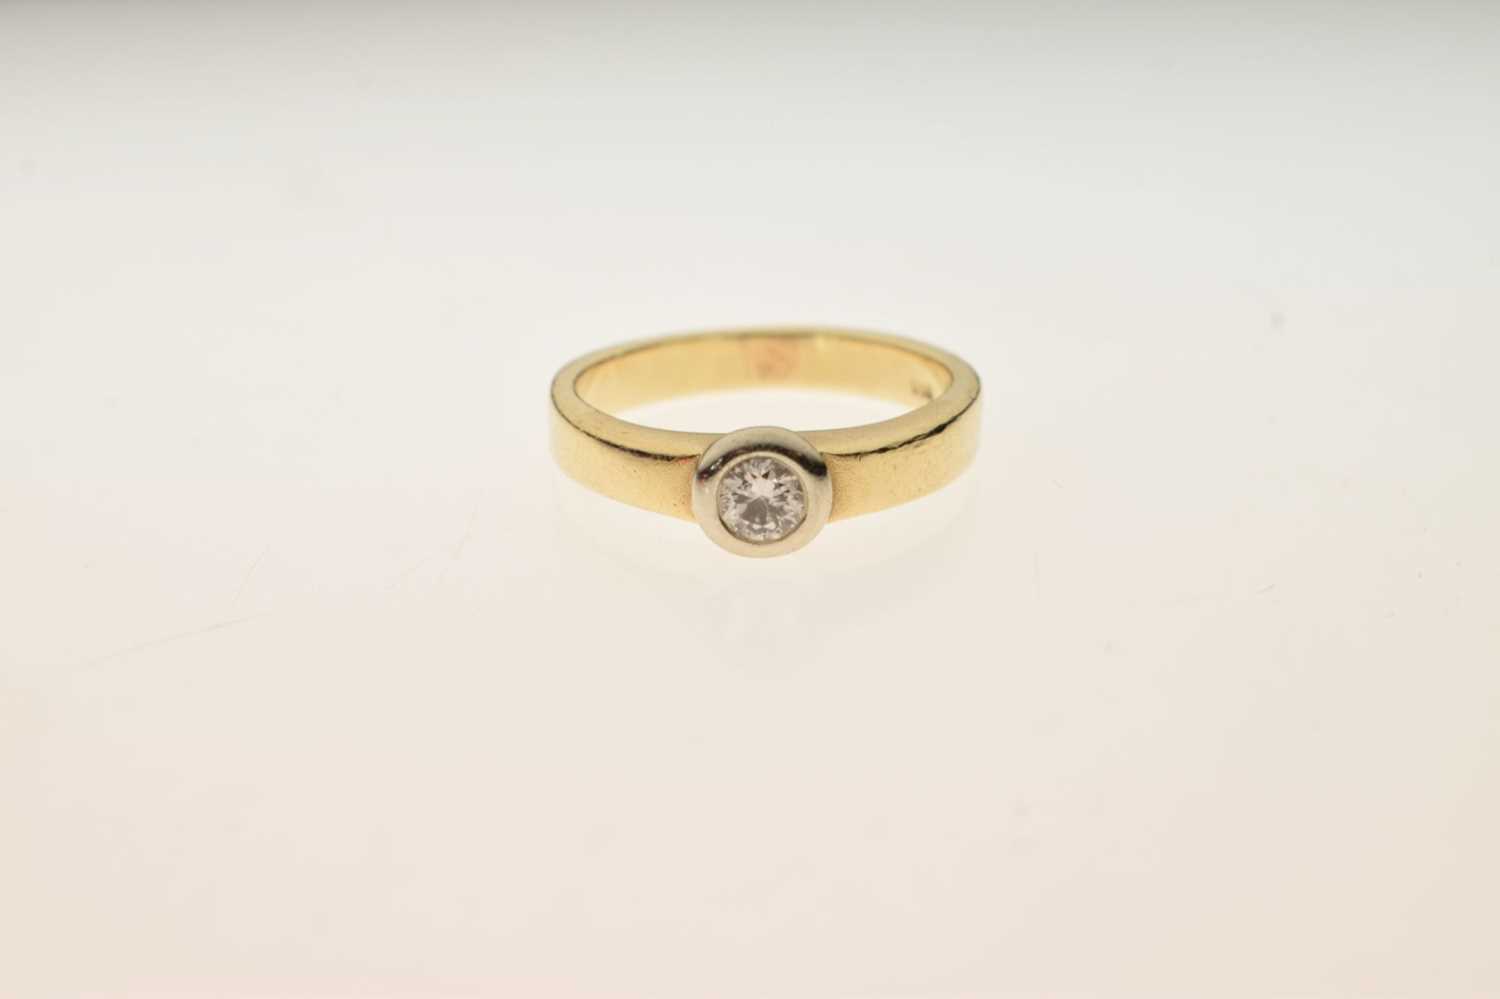 Solitaire diamond ring - Image 6 of 6